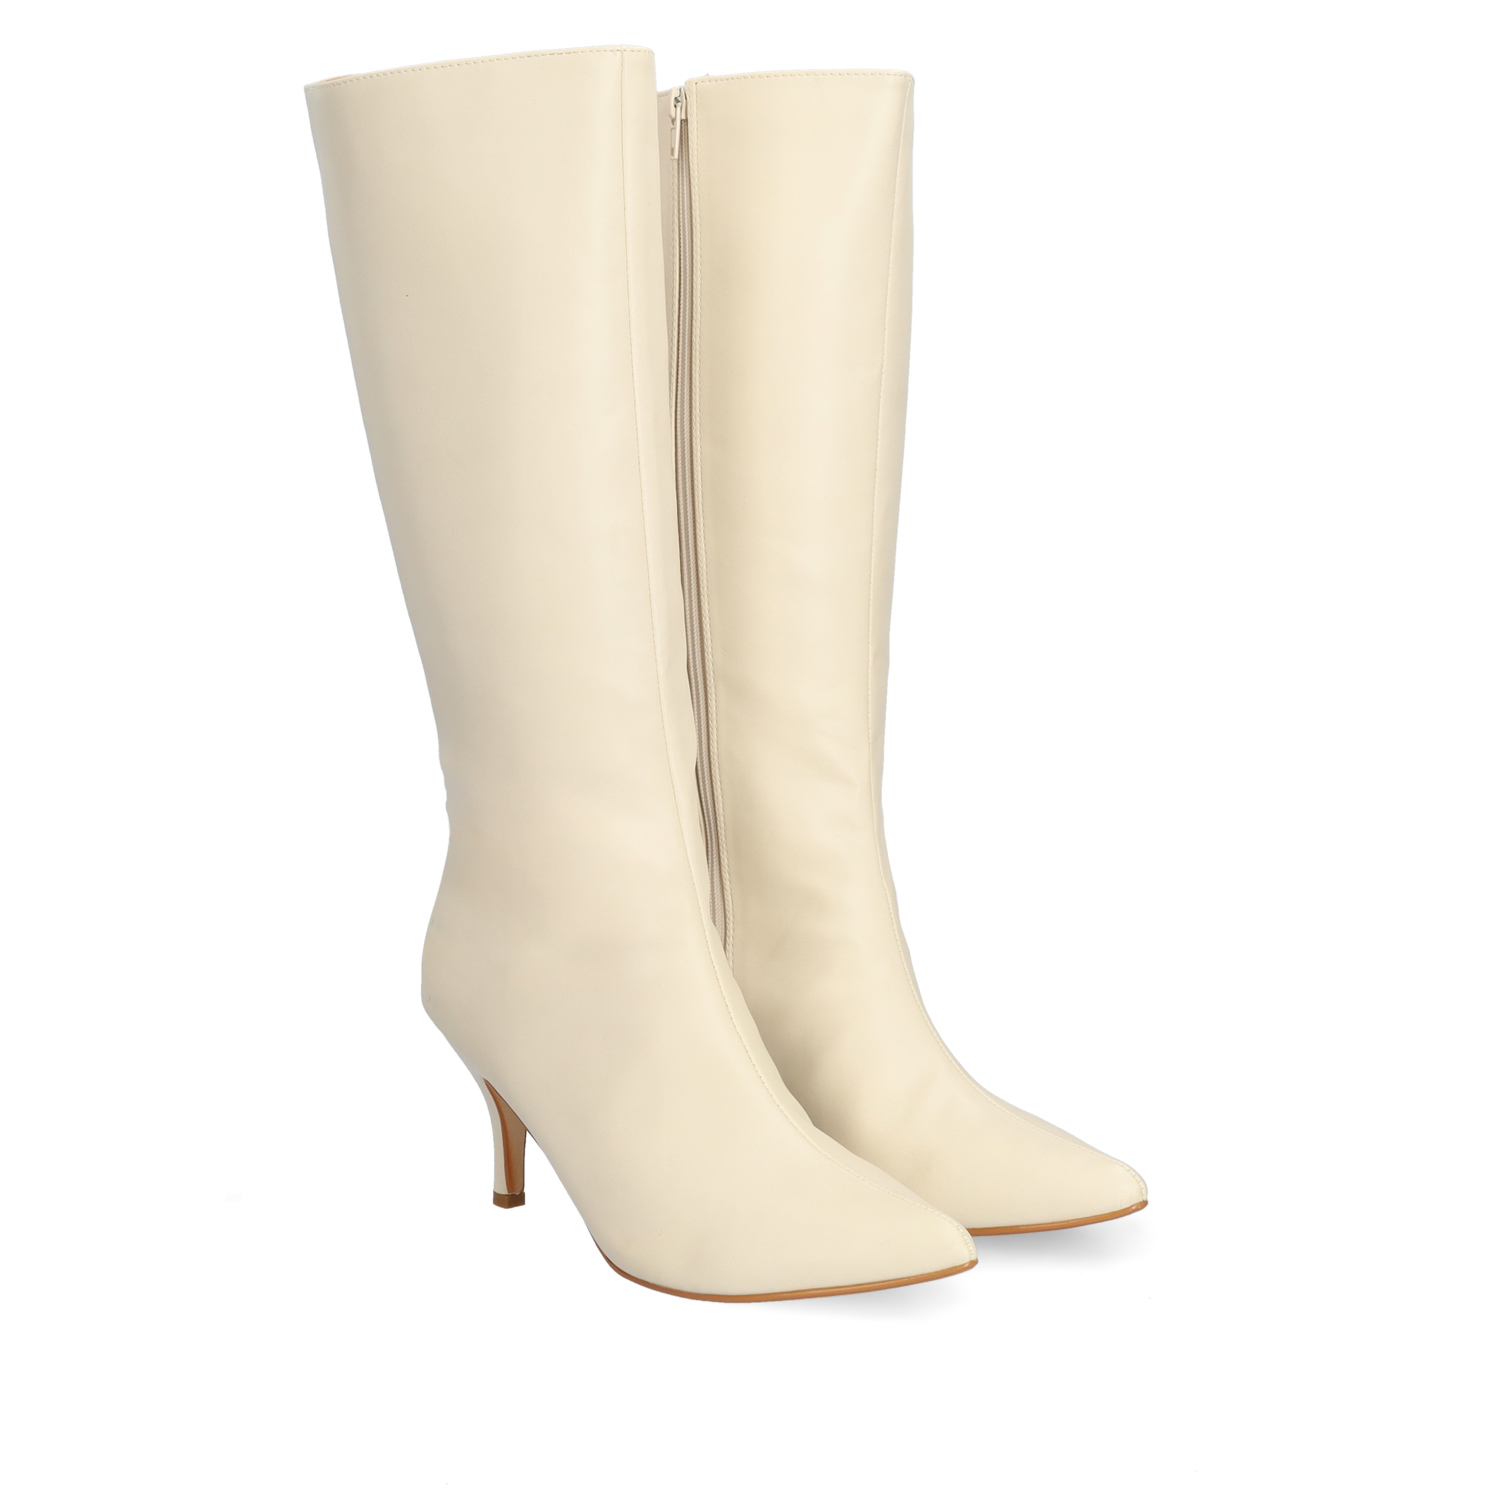 Smooth ivory colored faux leather boots 